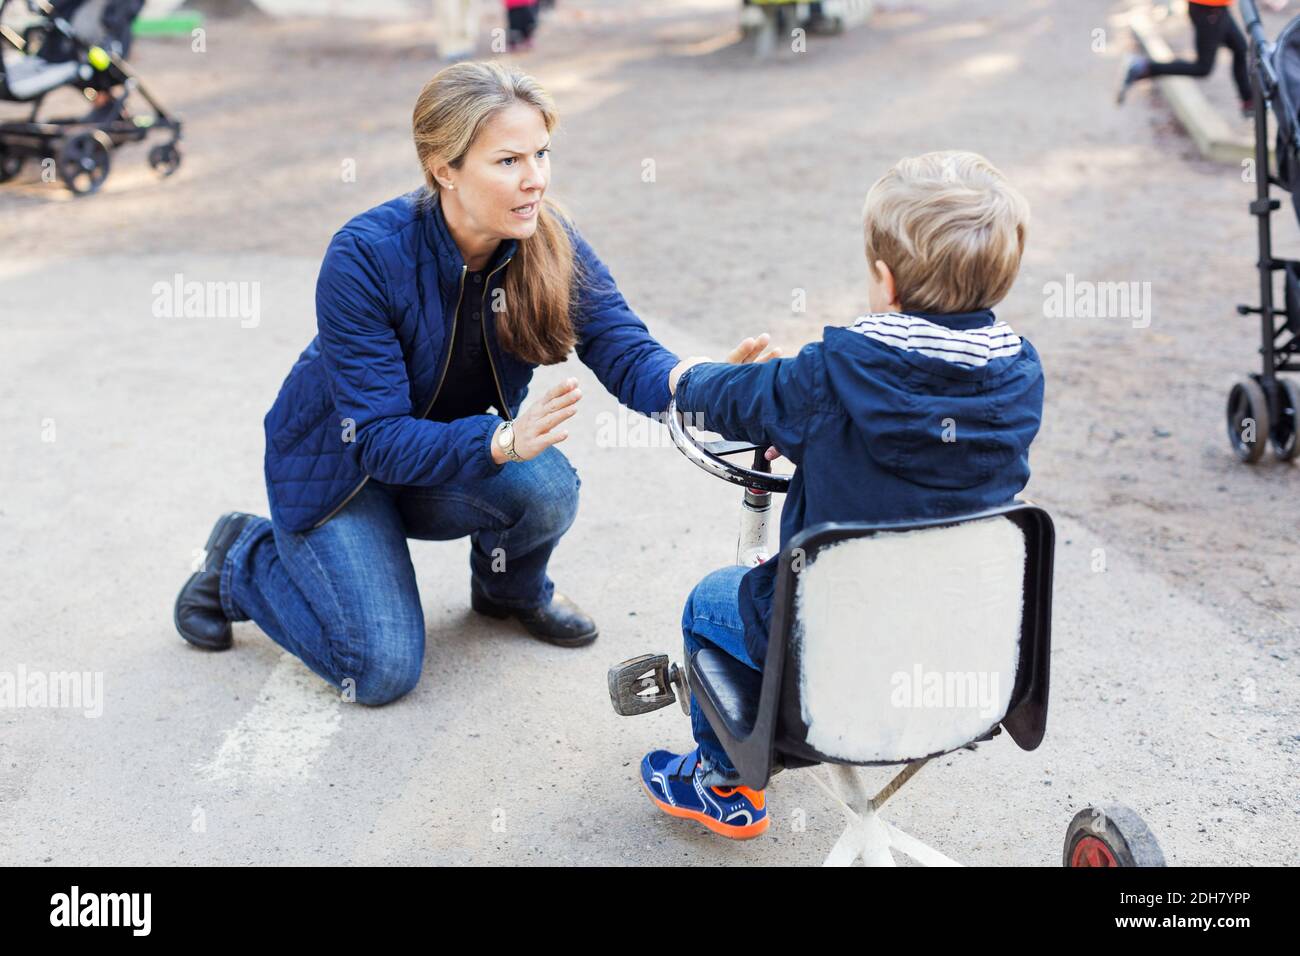 Angry teacher shouting at boy on tricycle Stock Photo